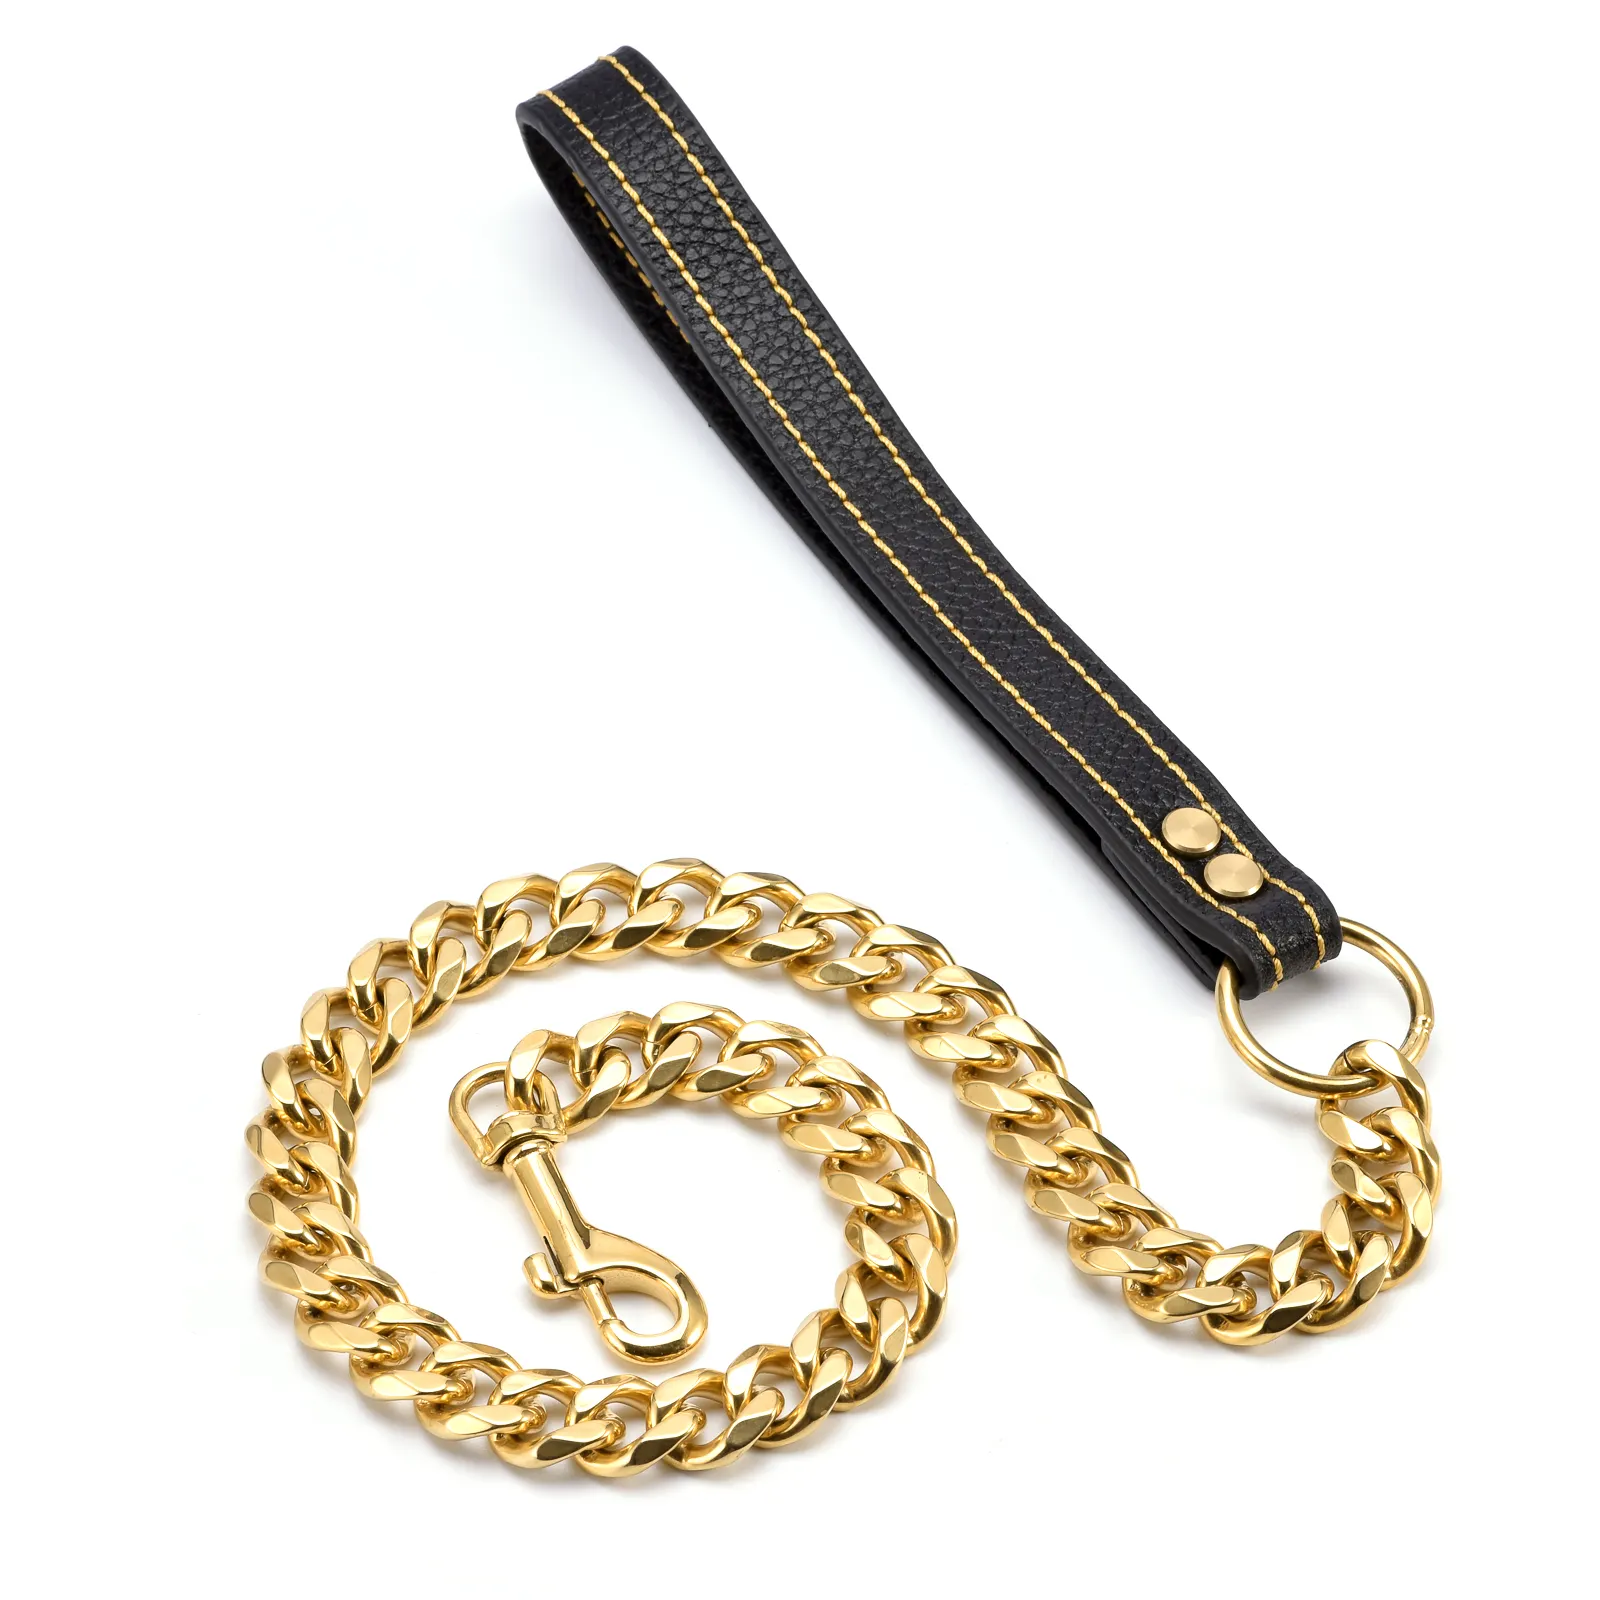 2023 high quality leather handle leads 316l stainless steel gold 15mm/19mm cuban chain dog leash